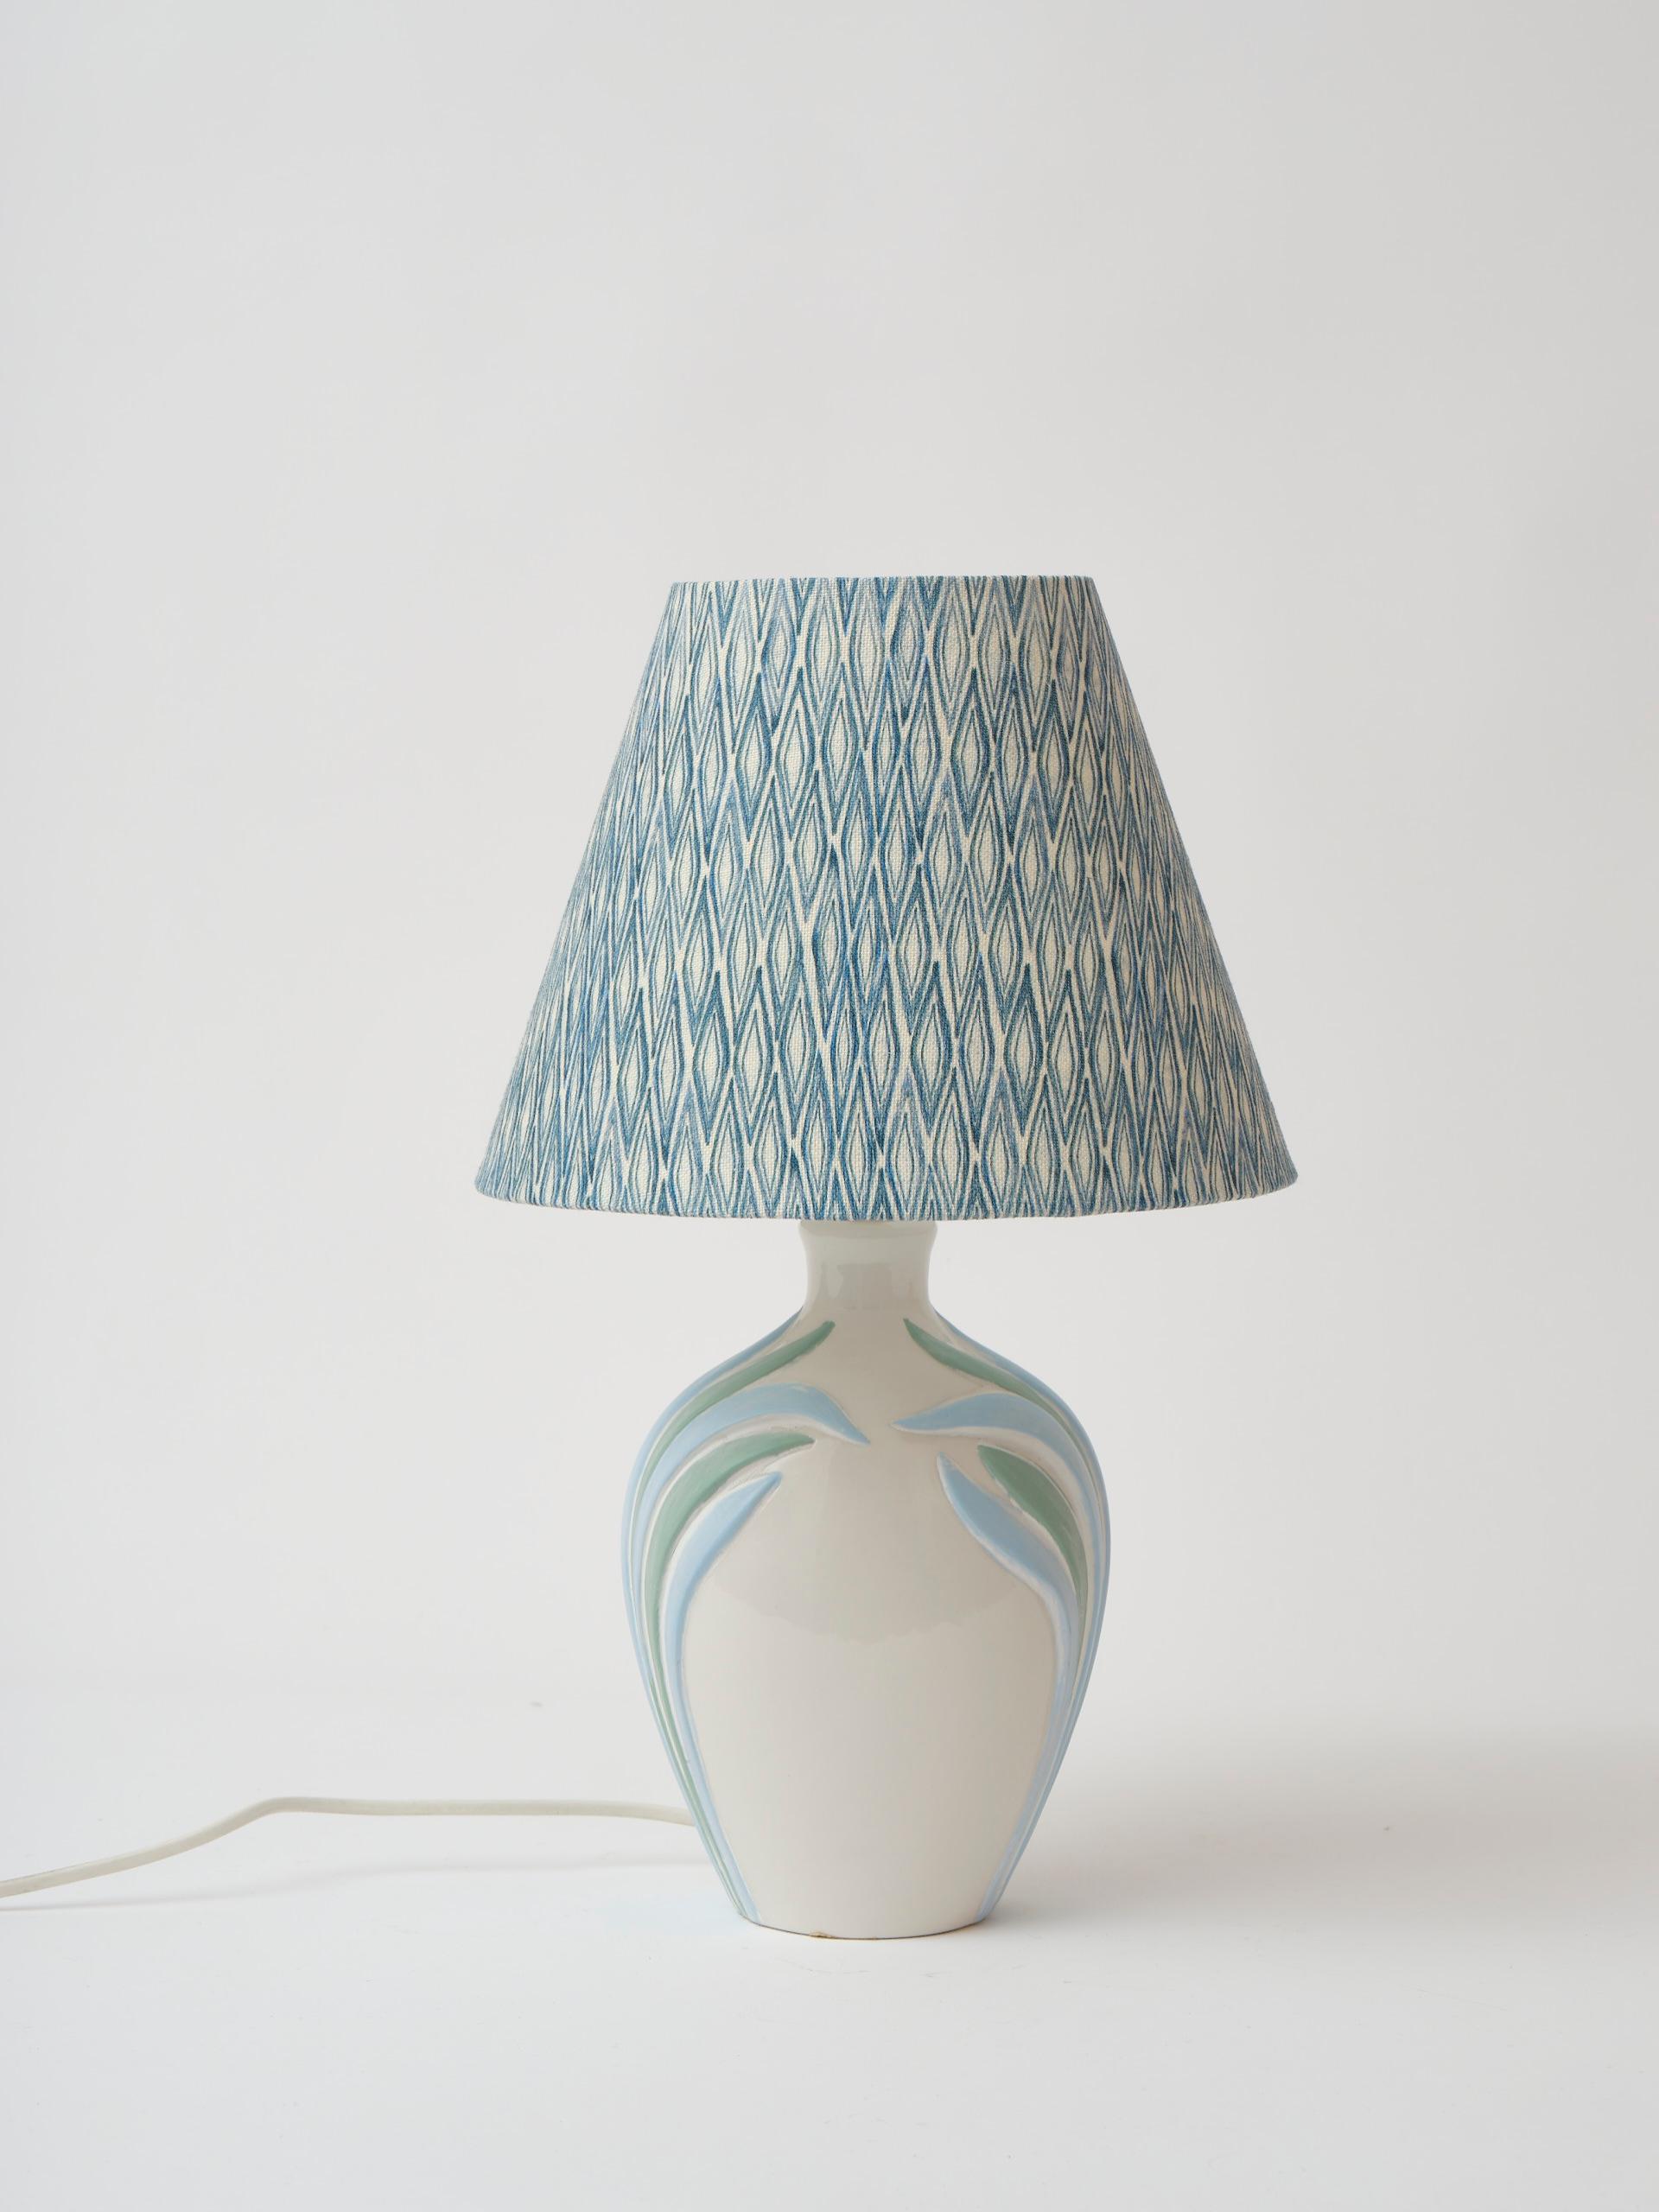 Italian 1980s table lamp with botanical decoration in soft blue and green In Good Condition For Sale In Frederiksberg C, DK